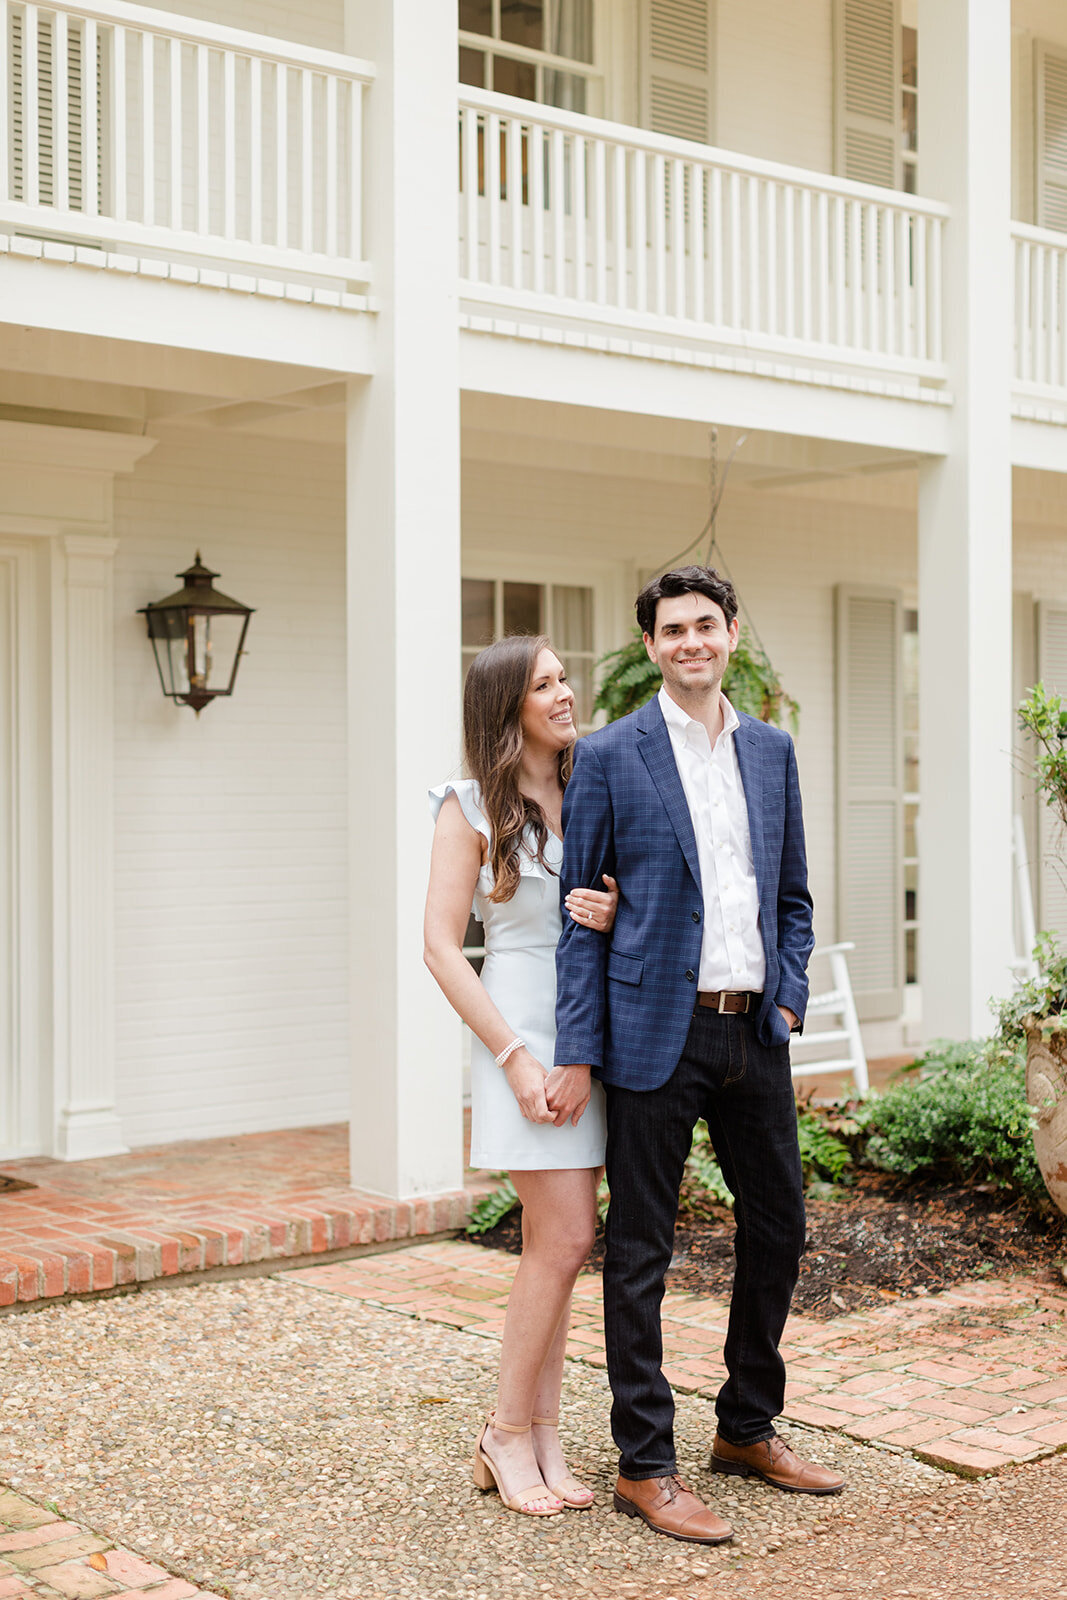 Engagement portraits of couple at home